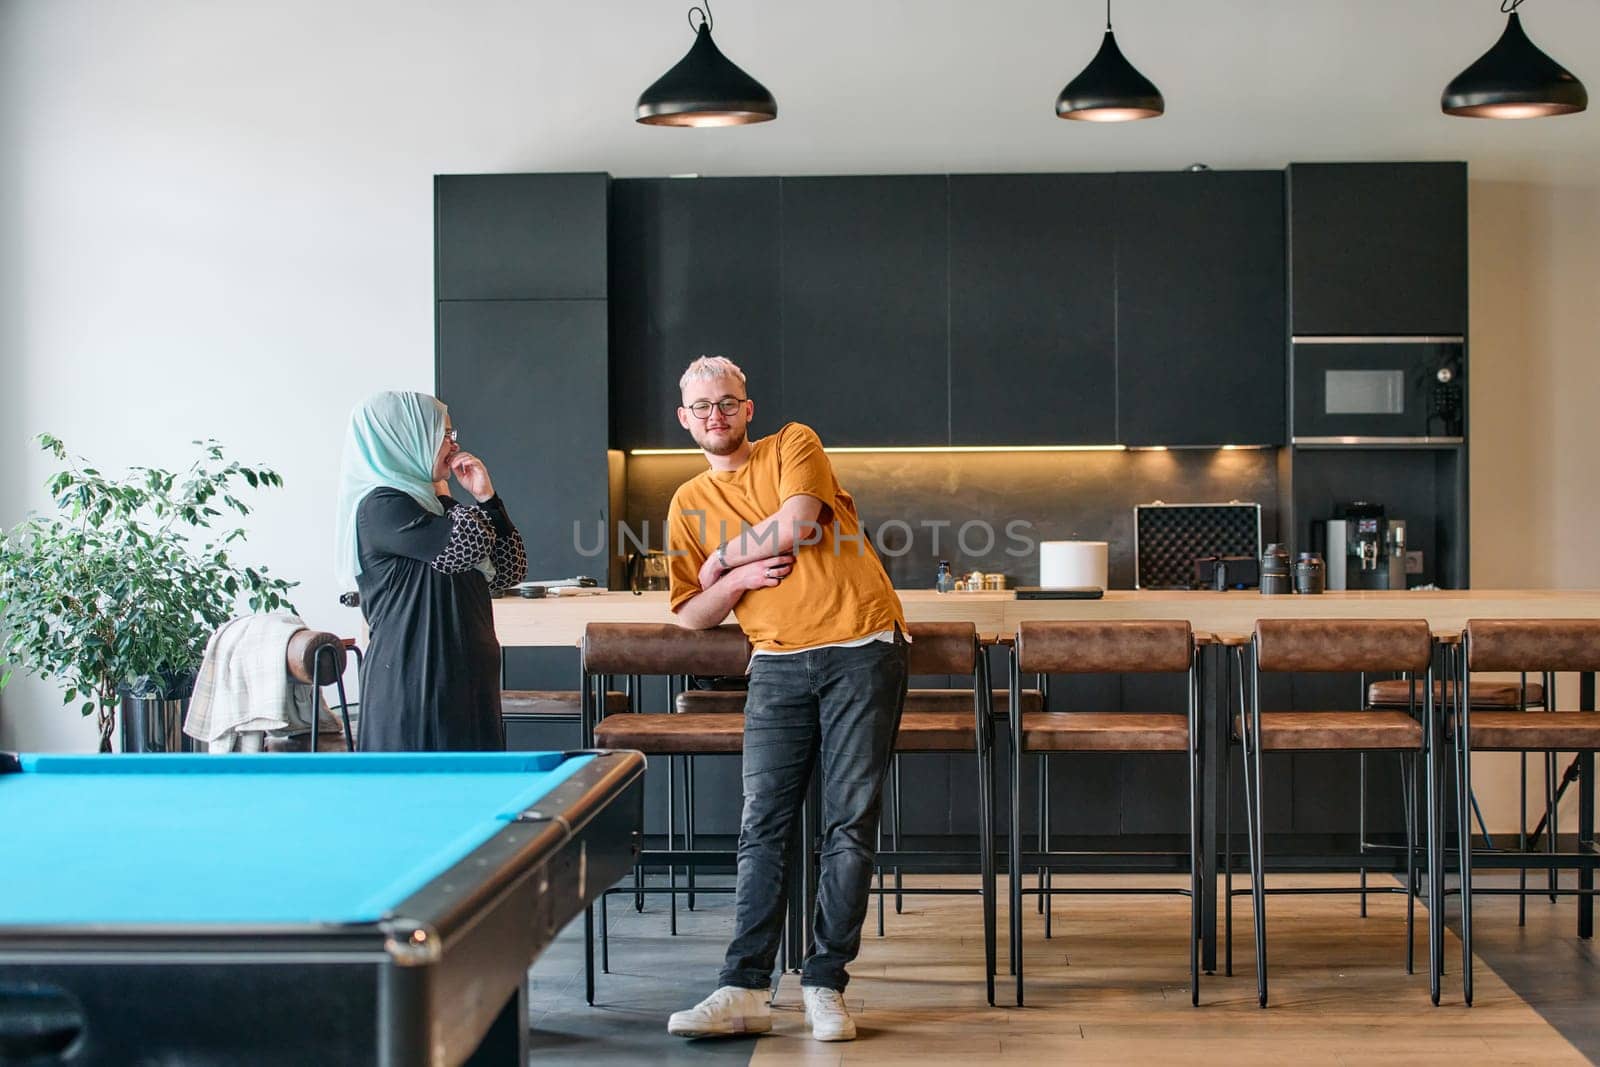 A candid moment captured in the workplace. A blonde man engages in conversation with his hijab clad female colleague during a coffee break